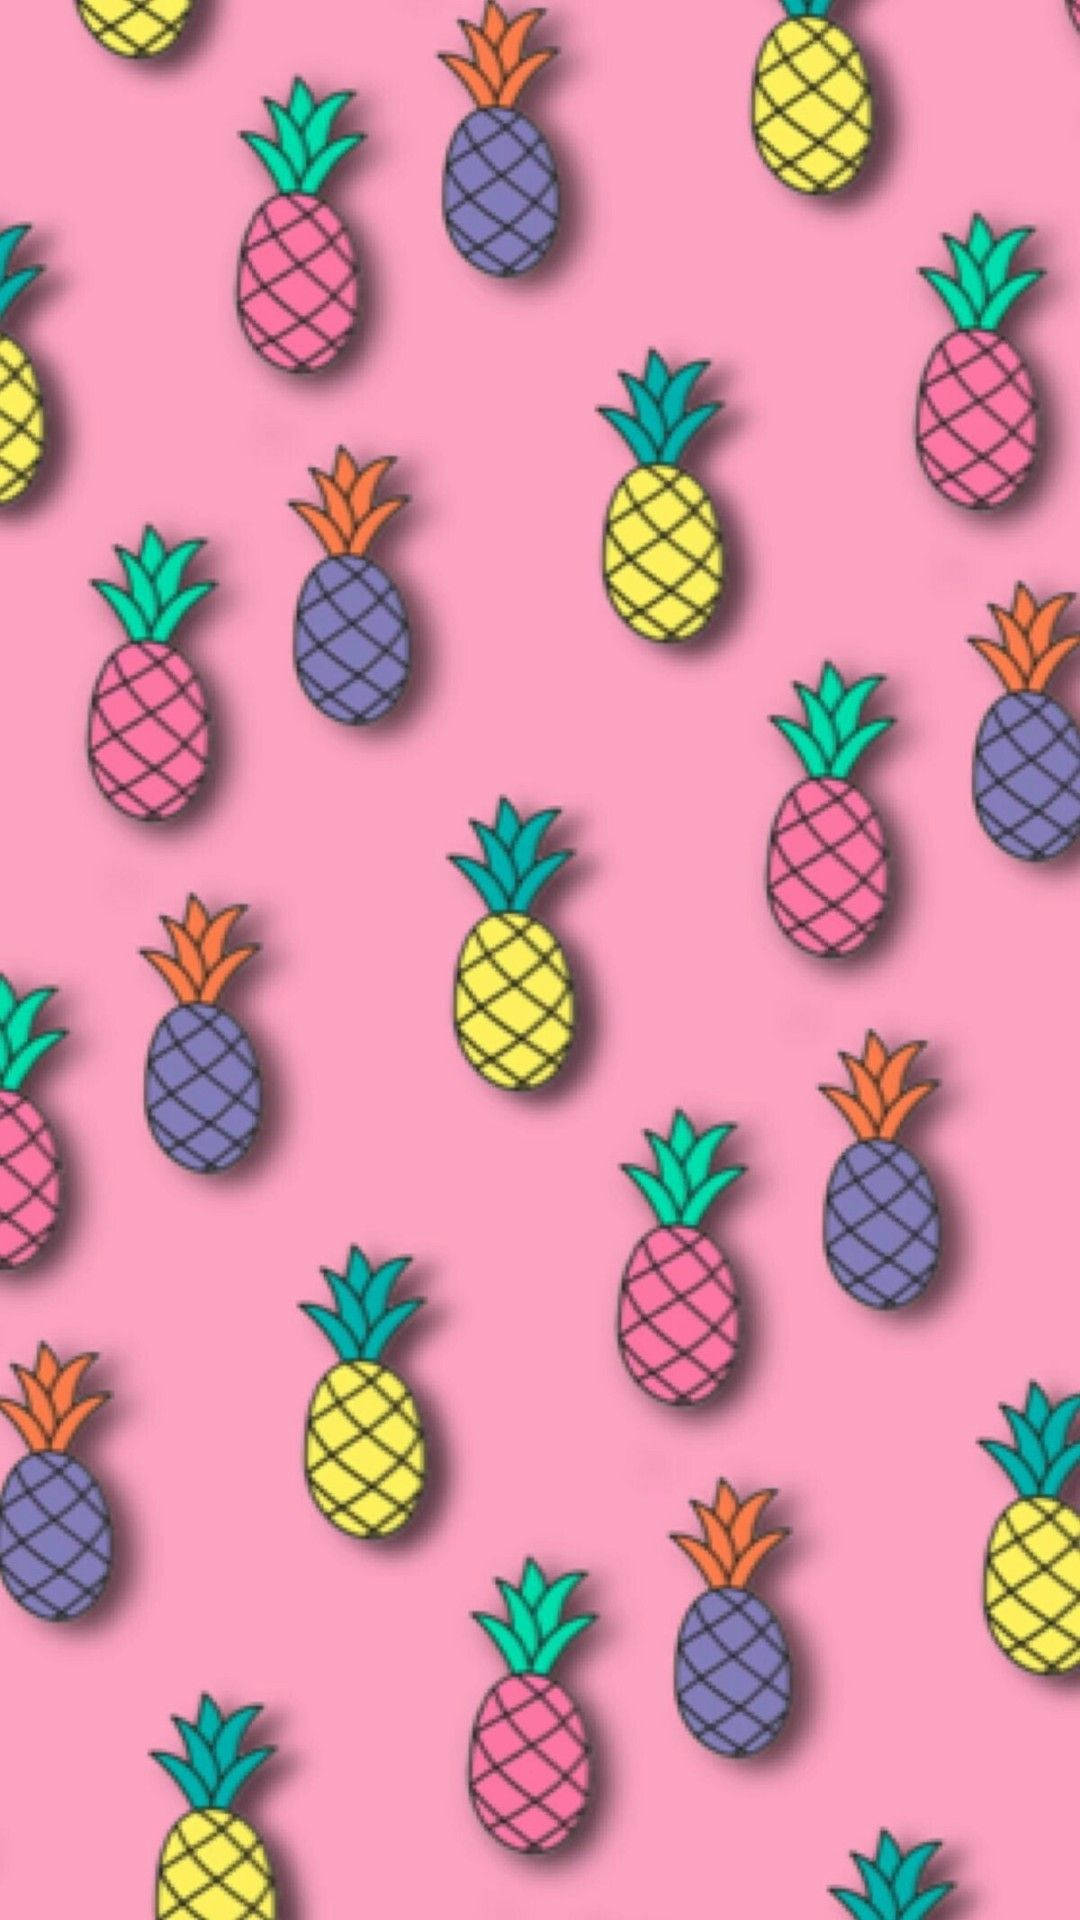 Pineapples On Pink Background Wallpaper